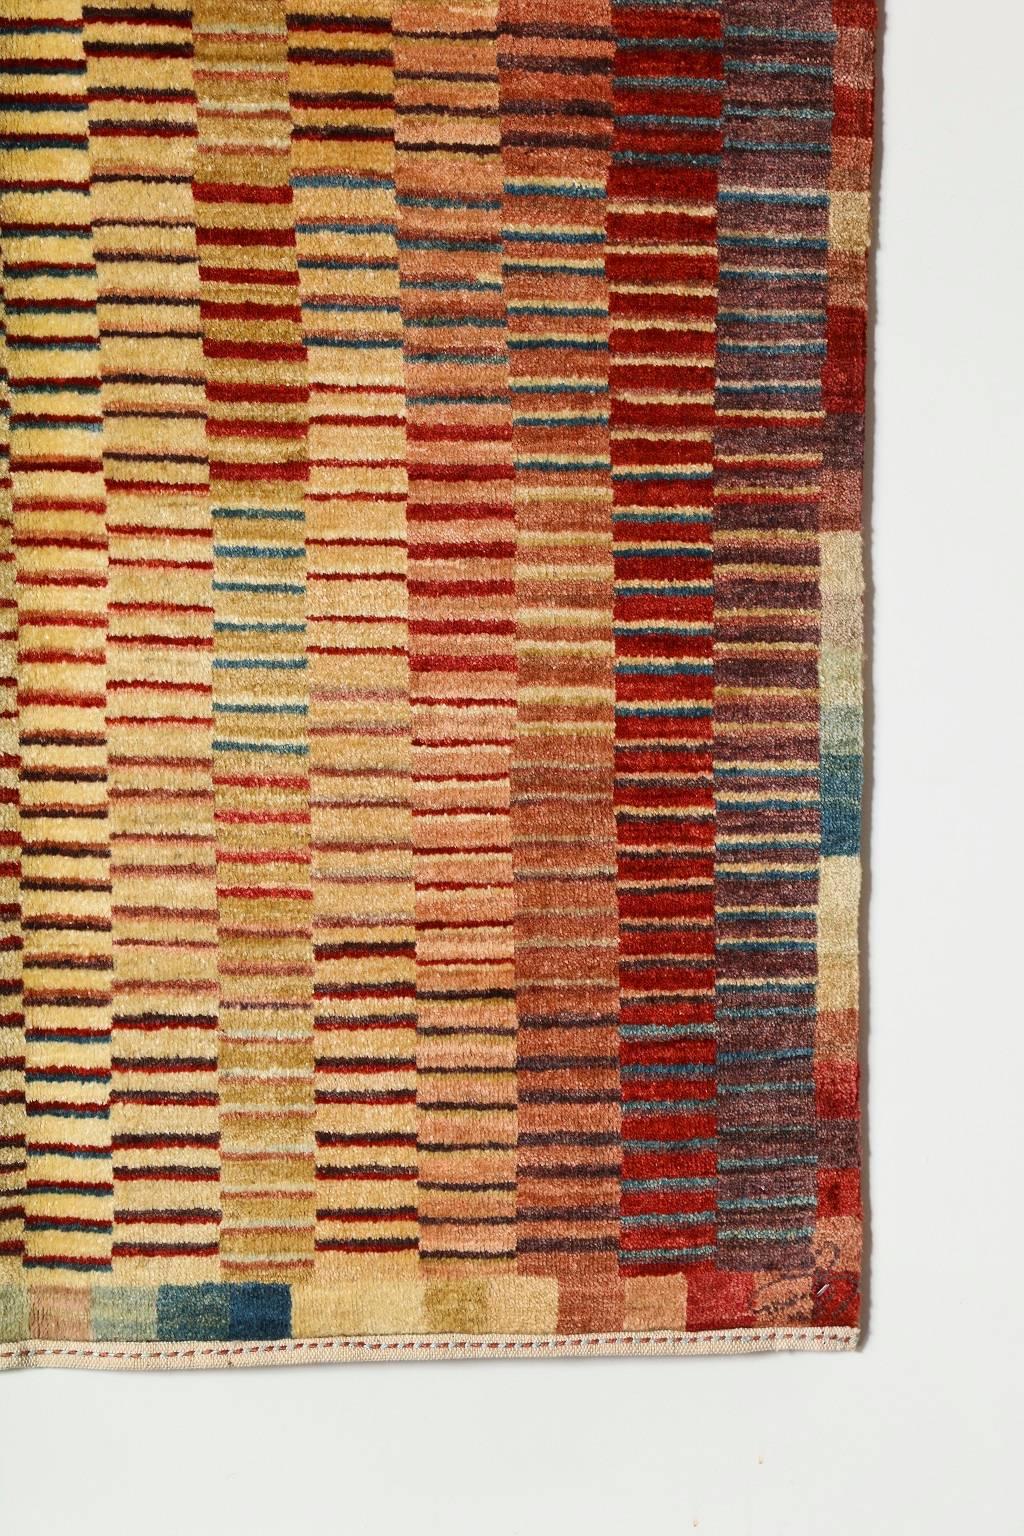 Persian Orley Shabahang Signature Carpet in Handspun Wool and Vegetable Dyes